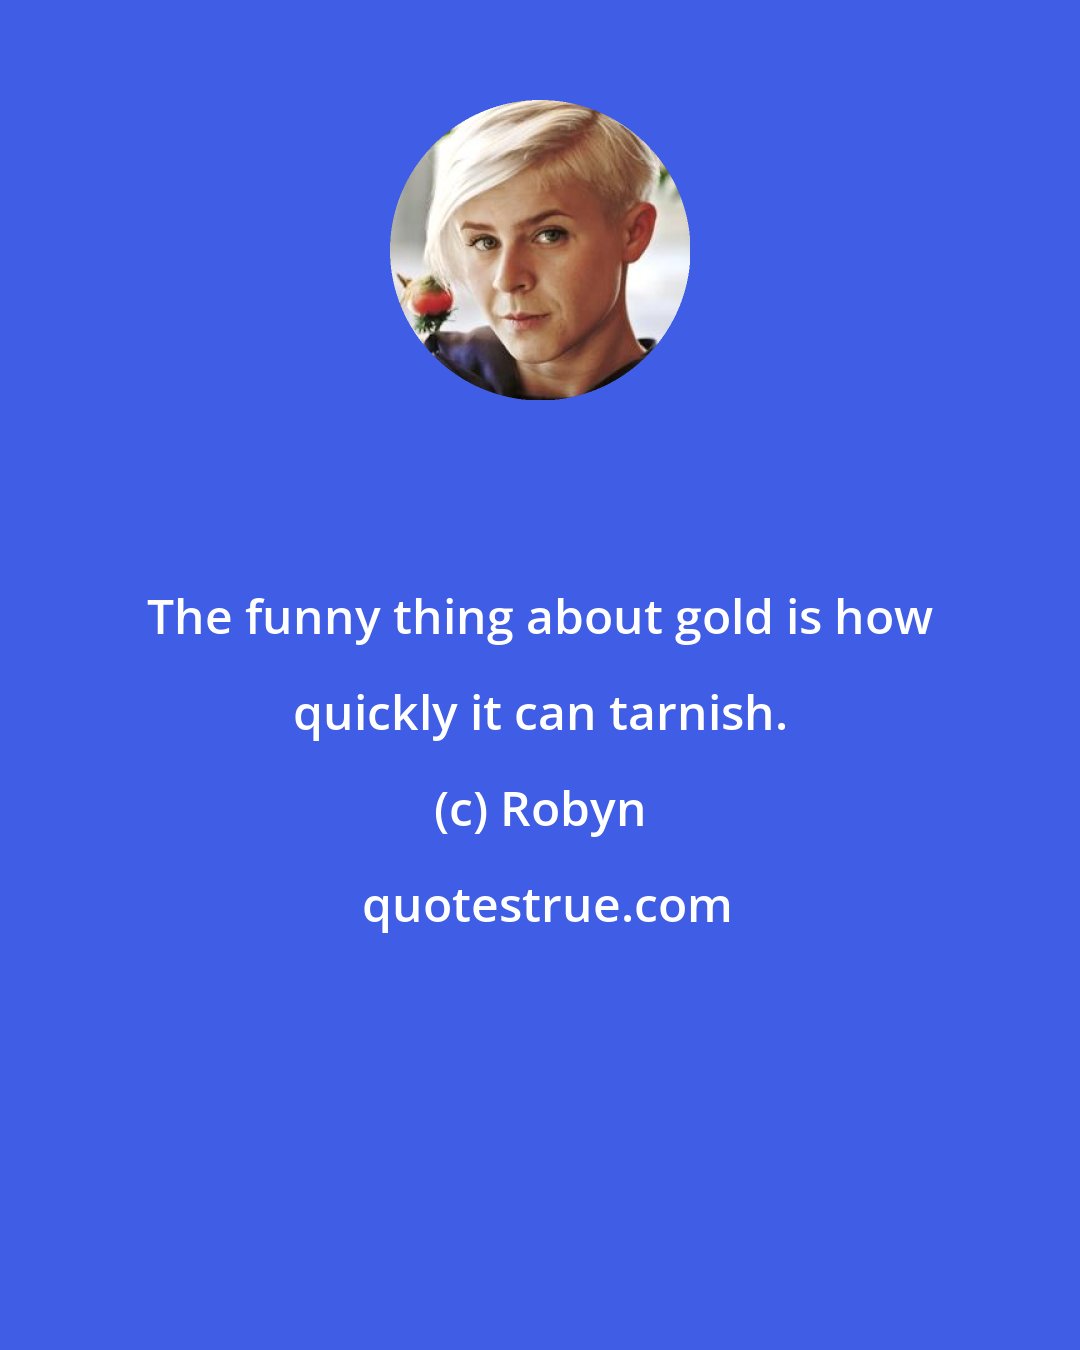 Robyn: The funny thing about gold is how quickly it can tarnish.